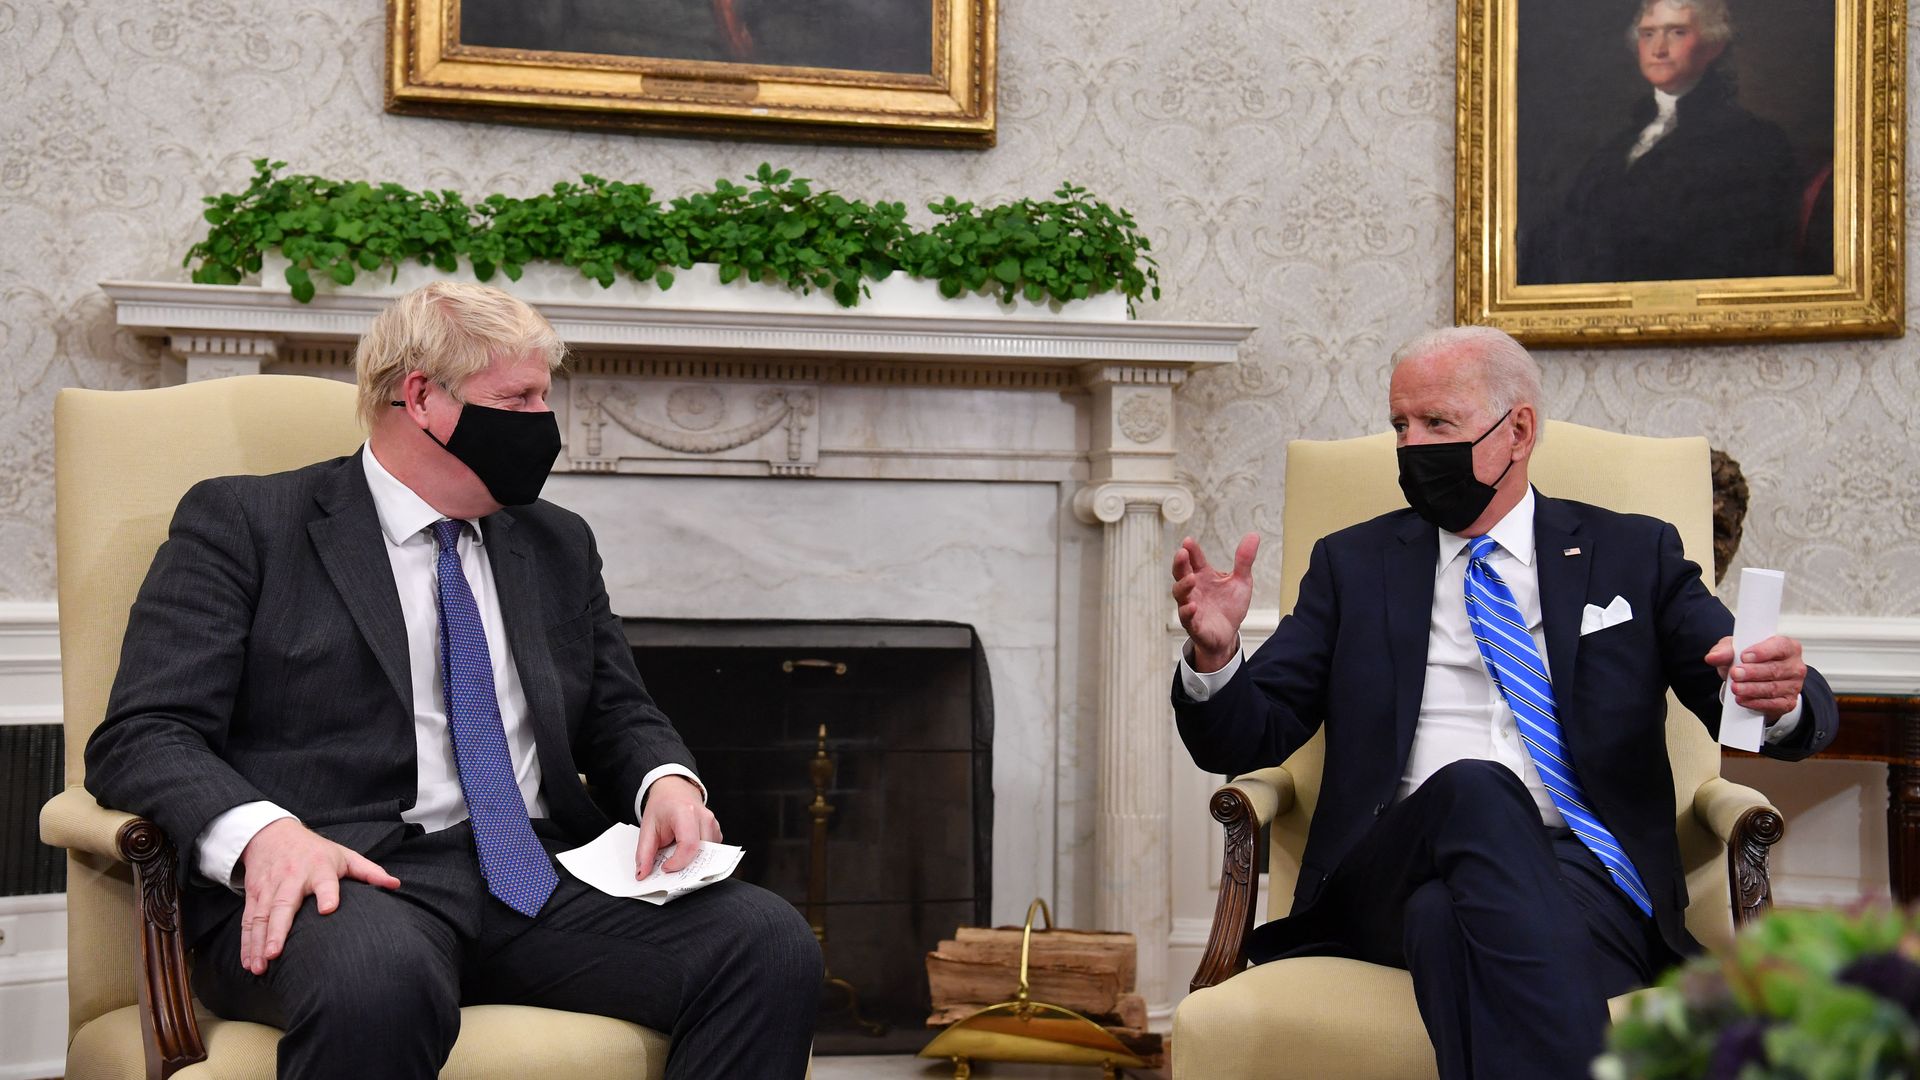 President Biden is seen meeting with British Prime Minister Boris Johnson in the Oval Office.